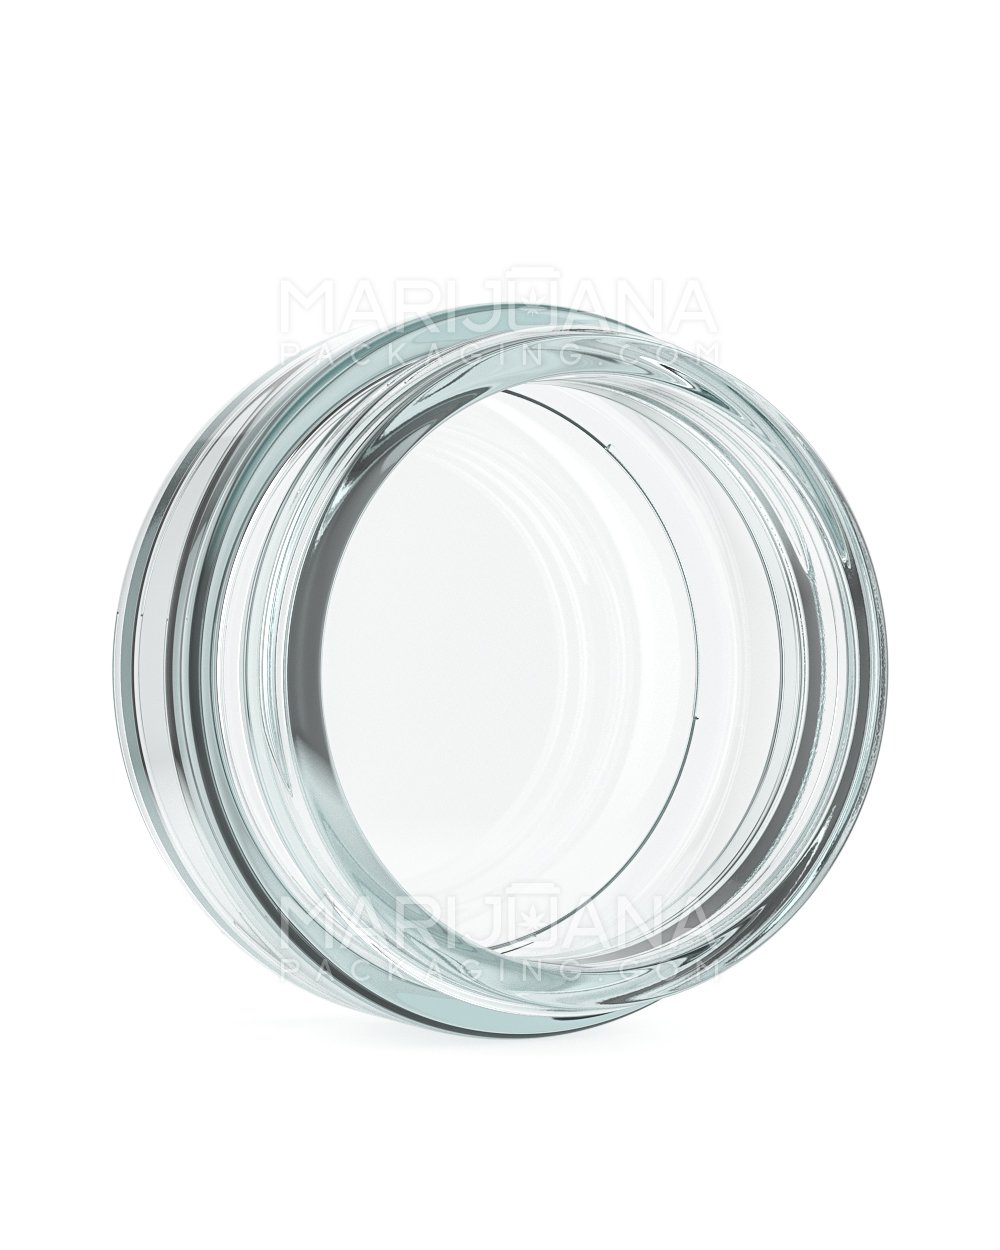 Straight Sided Clear Glass Jars | 63mm - 1.7oz | Sample - 3